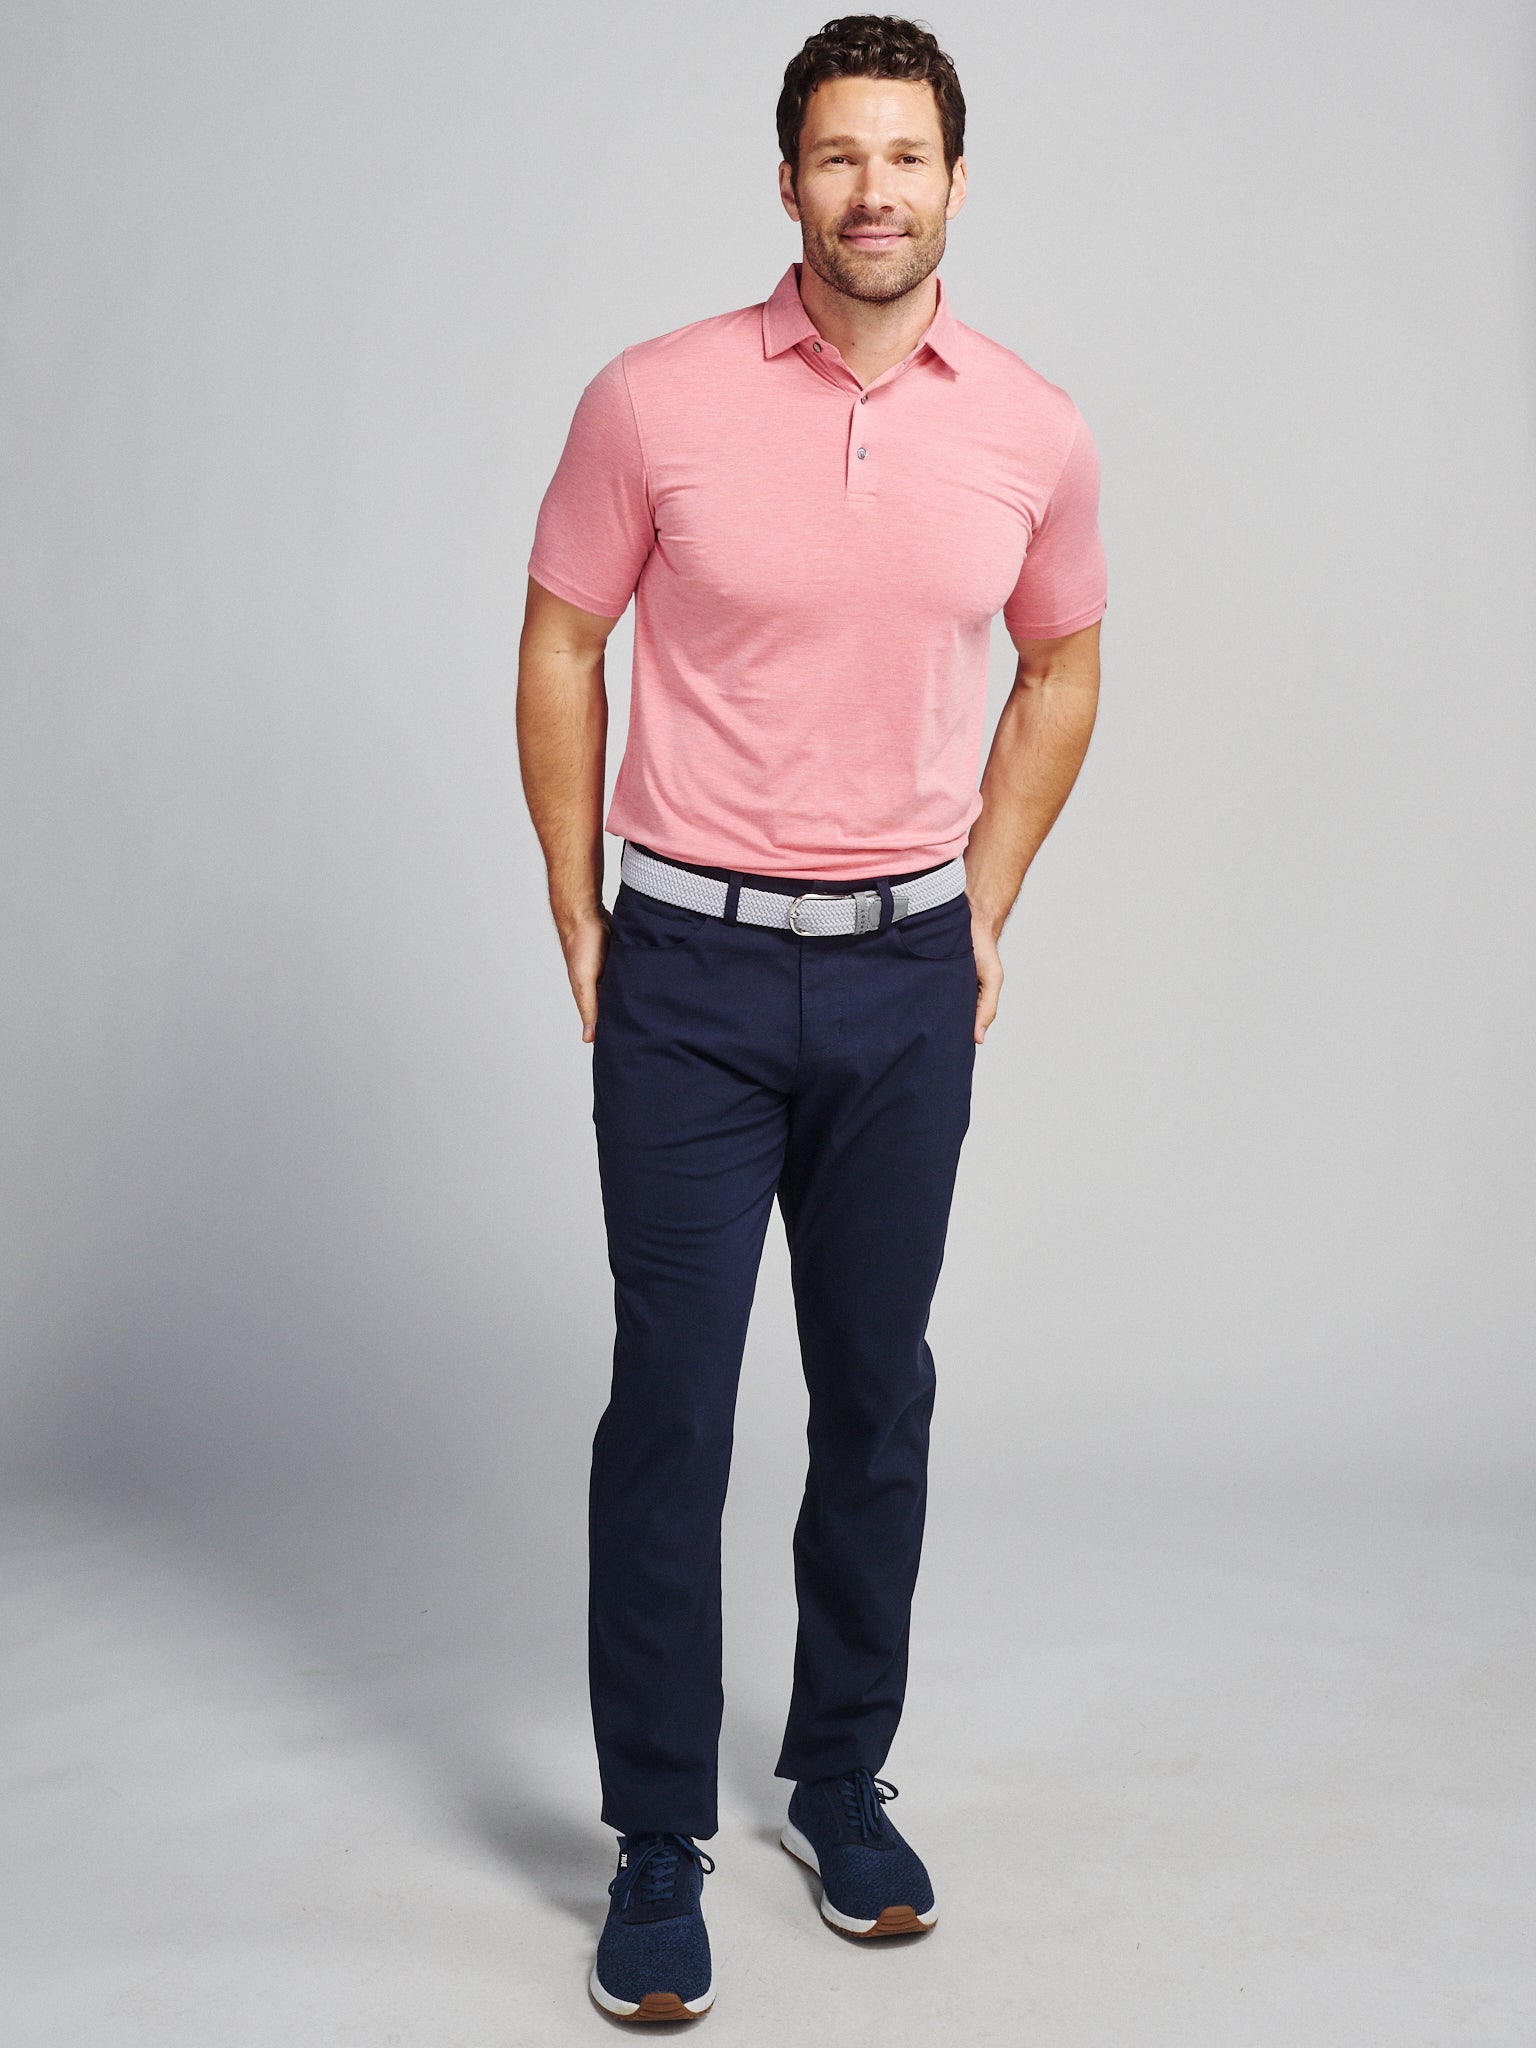 Cloud Lightweight Polo - tasc Performance (PunchHeather)